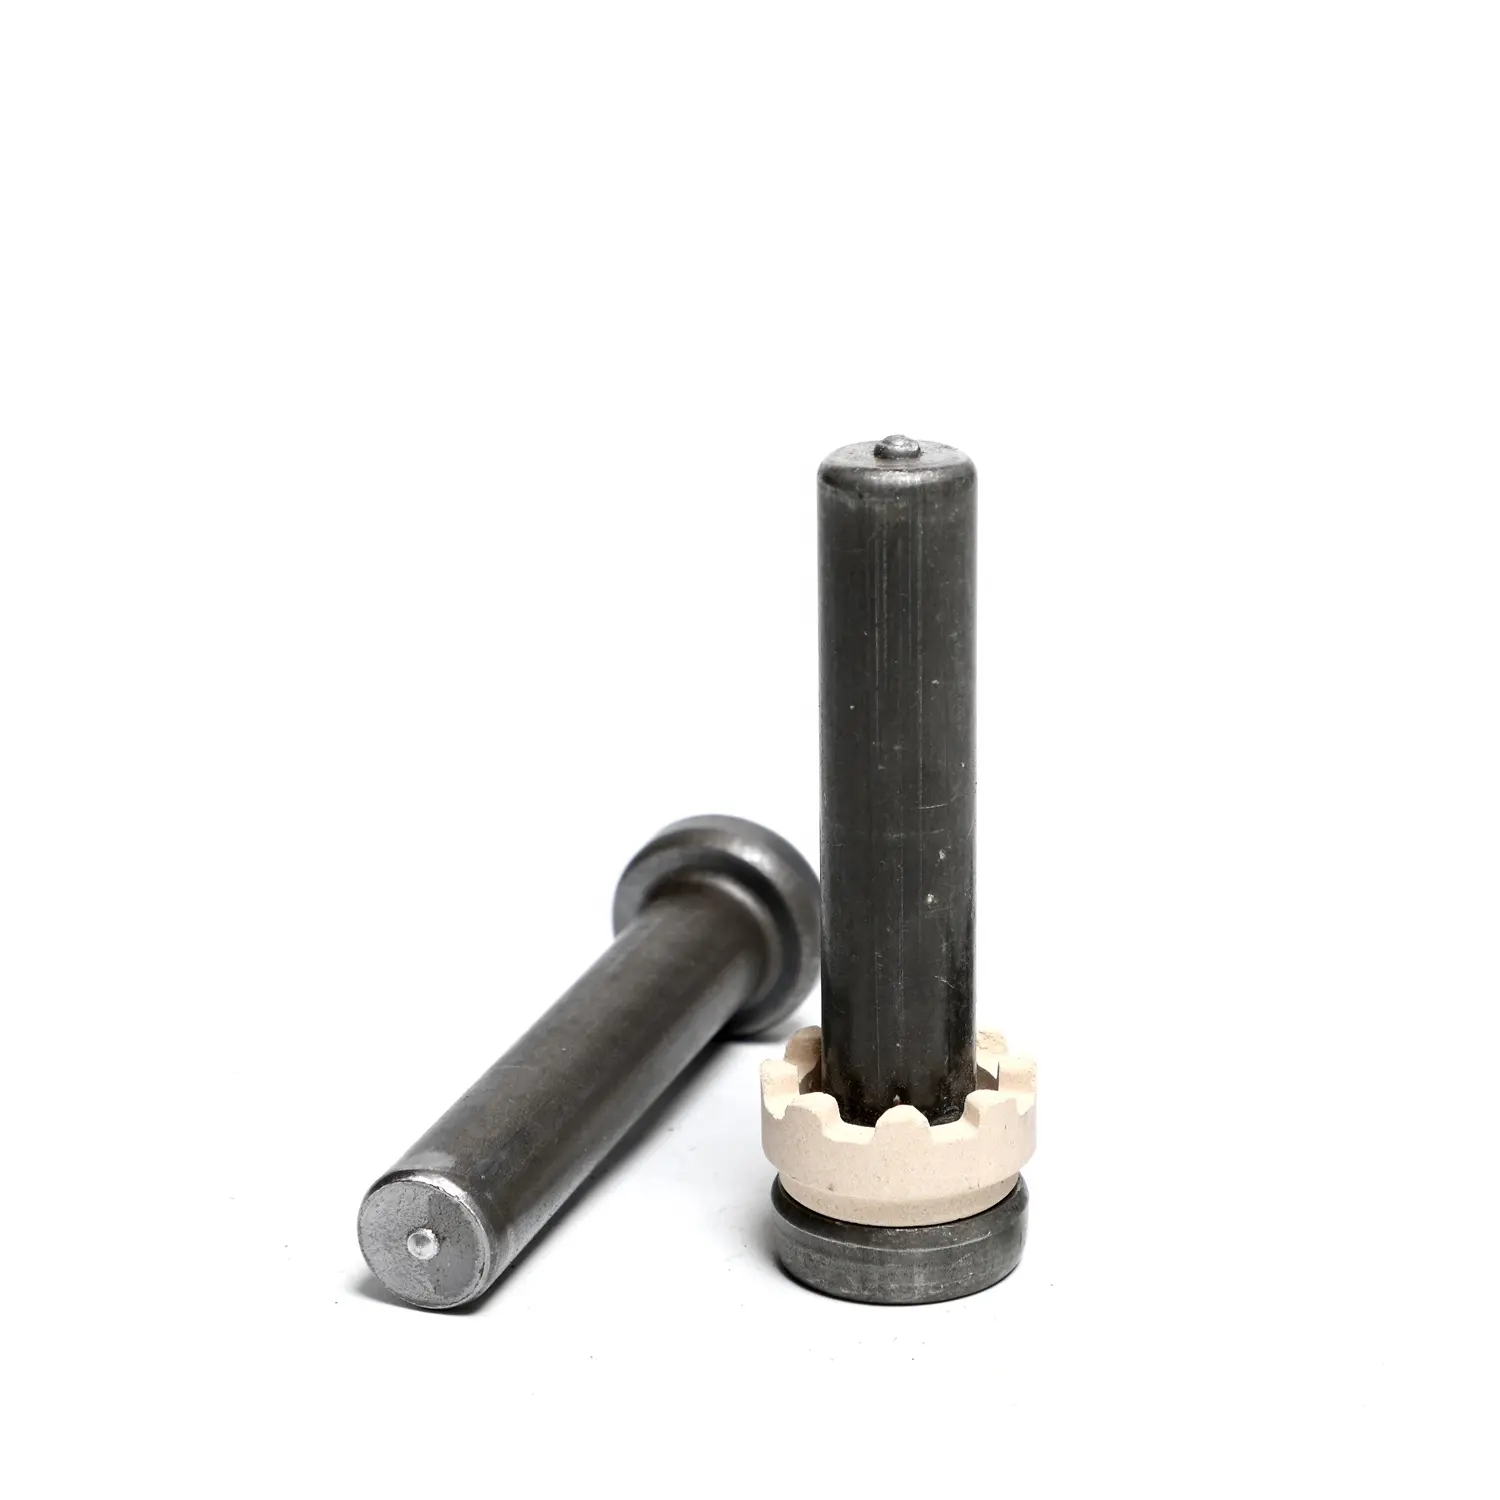 Nelson stud steel structure welding stud with ceramic flux